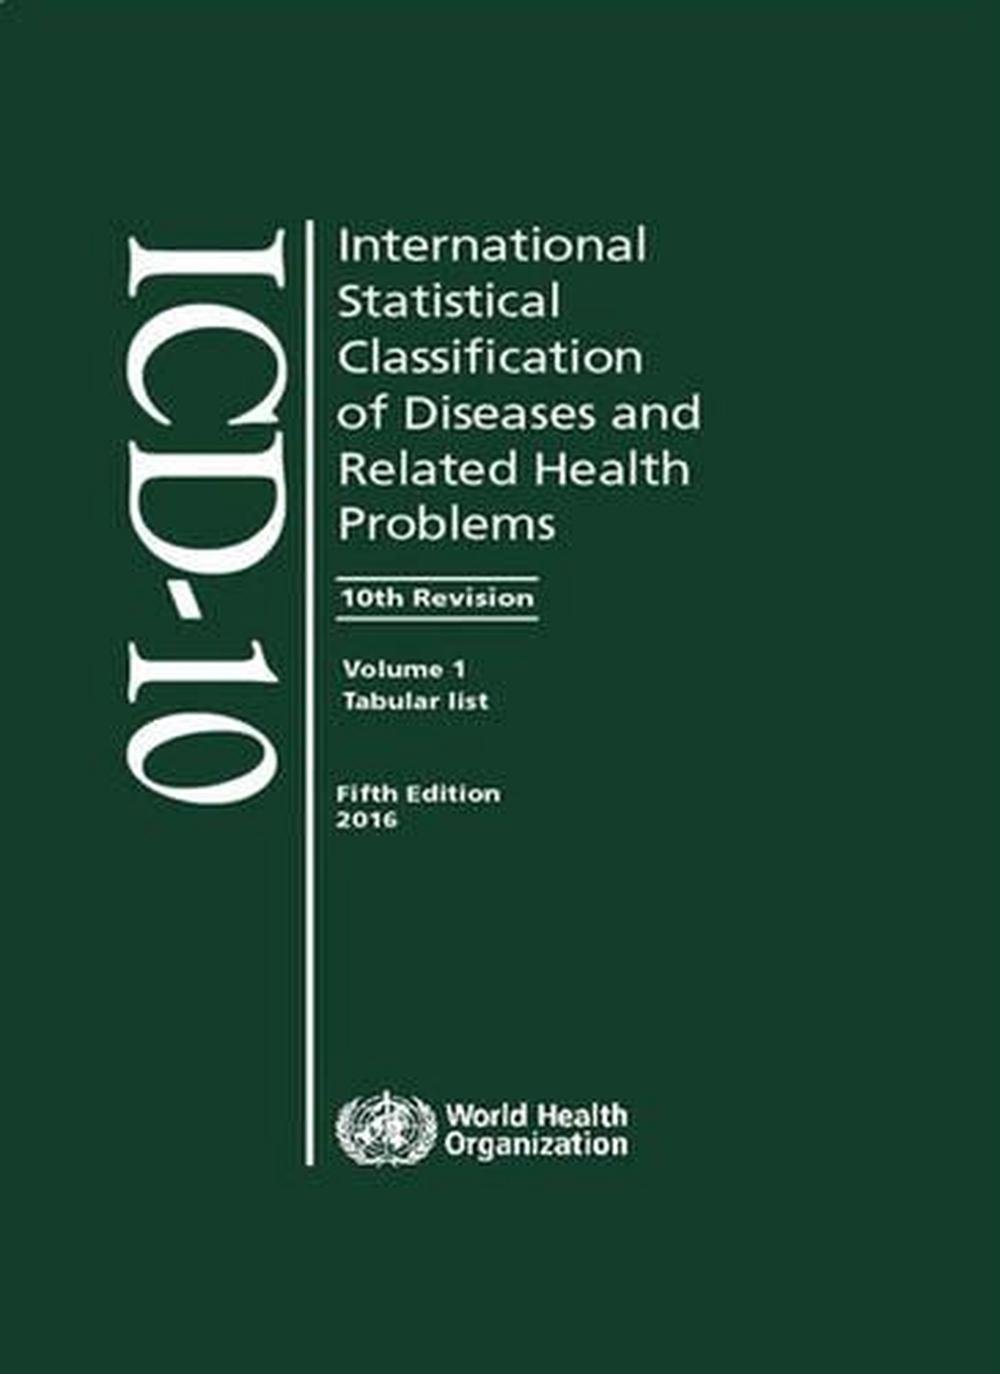 International Statistical Classification of Diseases and Related Health